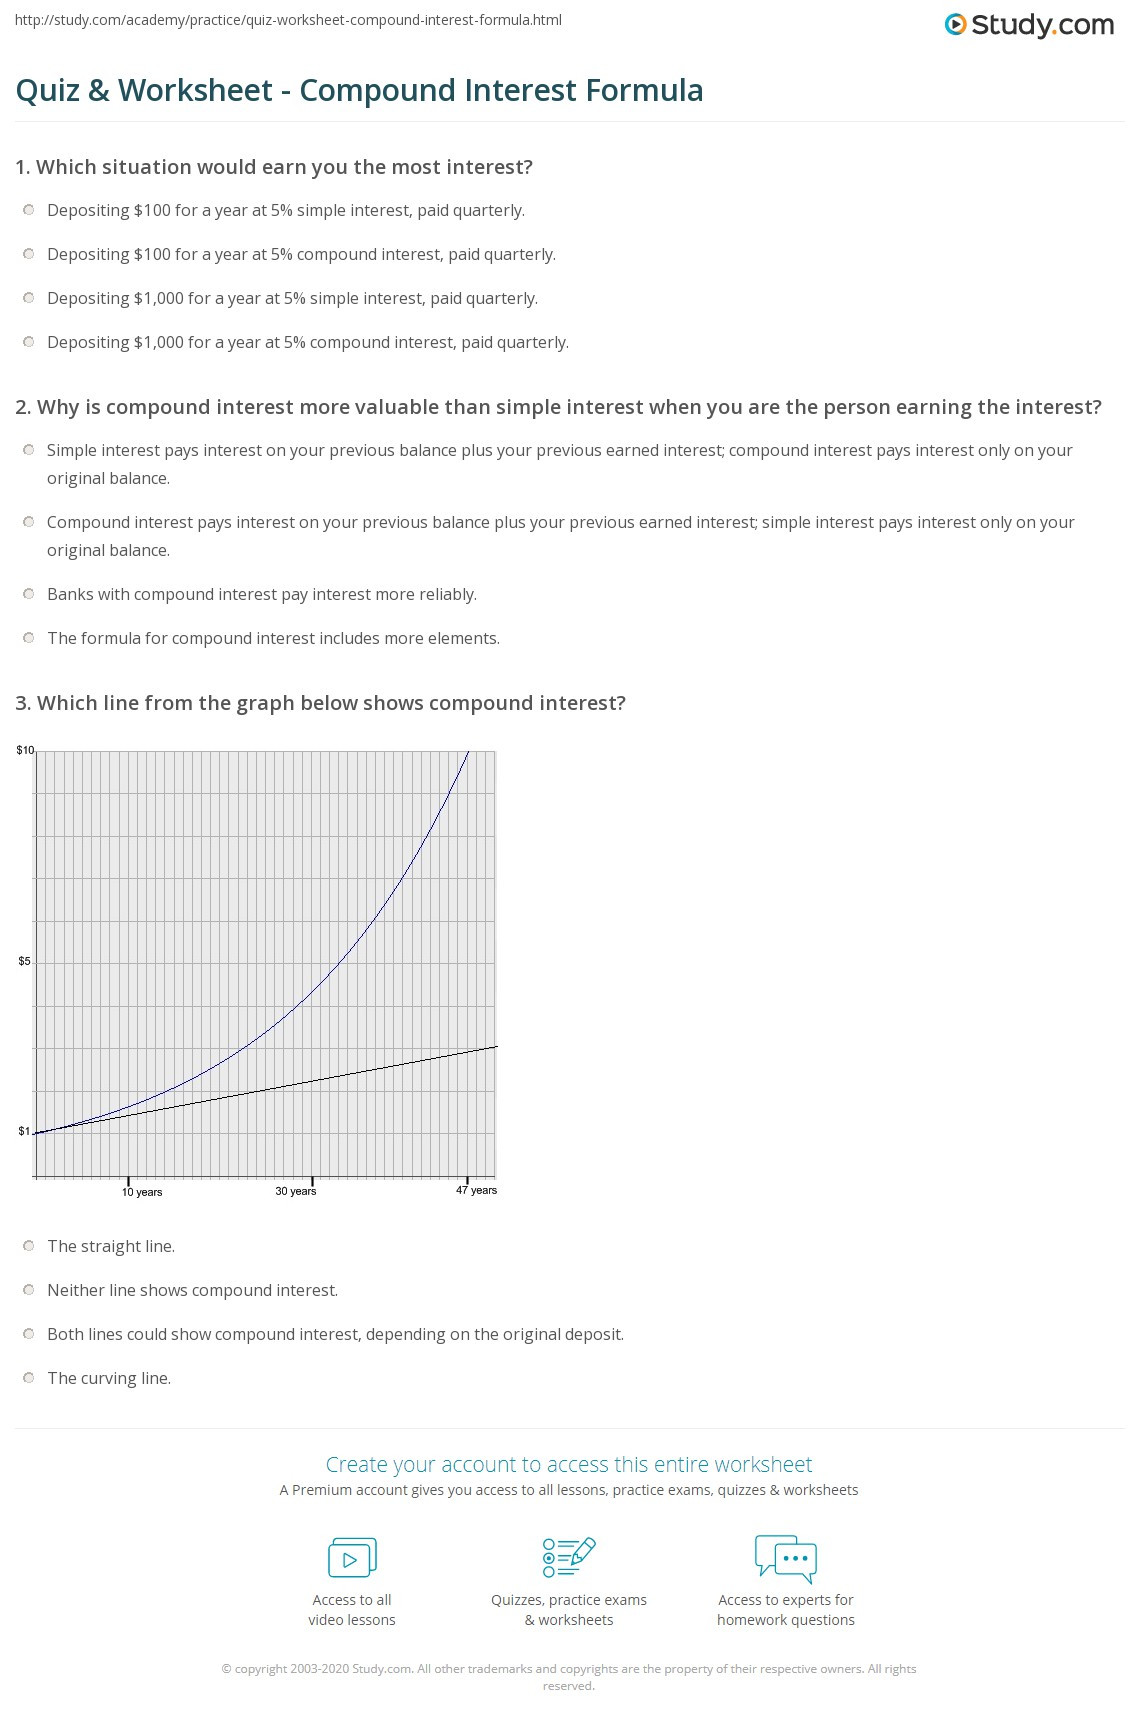 Simple and Compound Interest Worksheet Simple and Pound Interest Worksheet Answers the Best